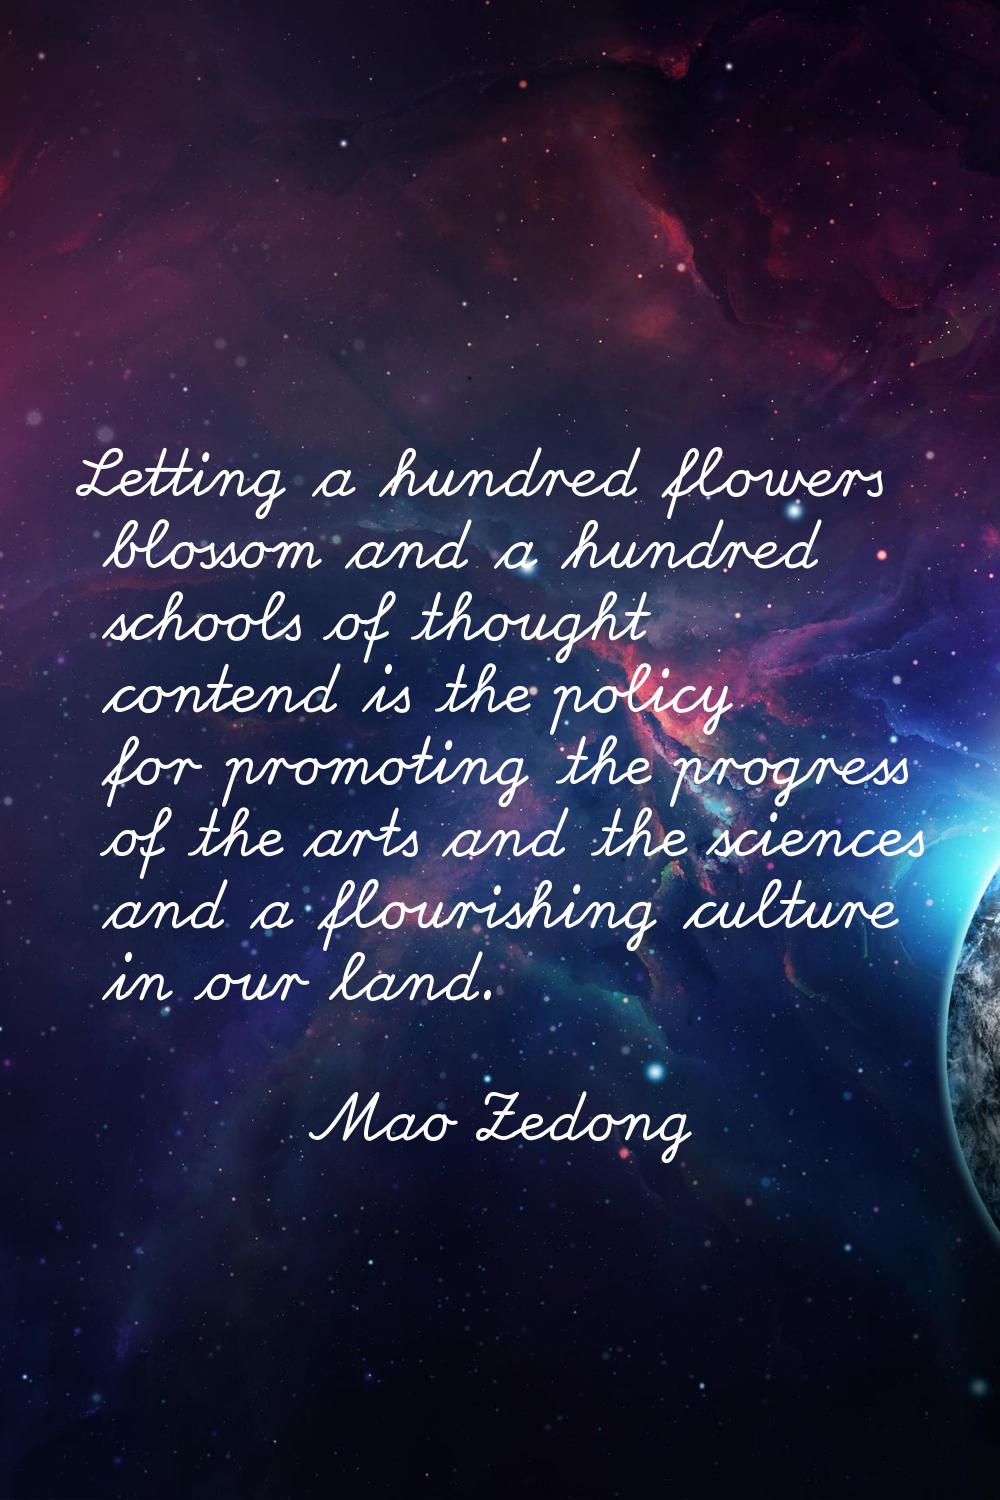 Letting a hundred flowers blossom and a hundred schools of thought contend is the policy for promot